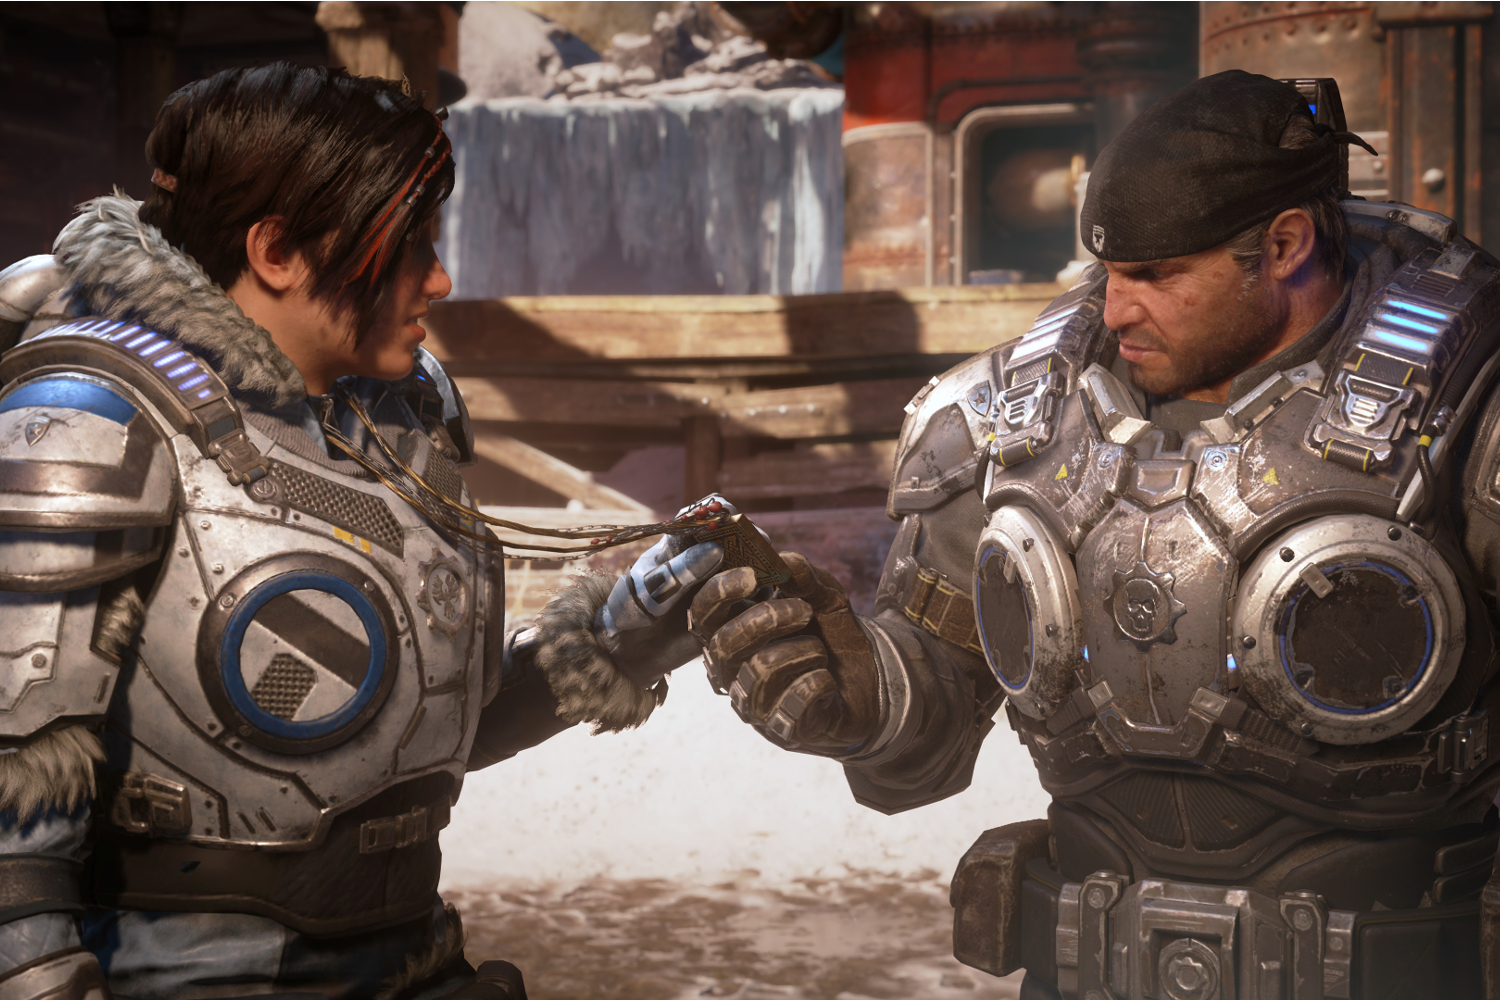 Gears 5 Sees Kait Diaz Go AWOL to Seek Answers From the Locus